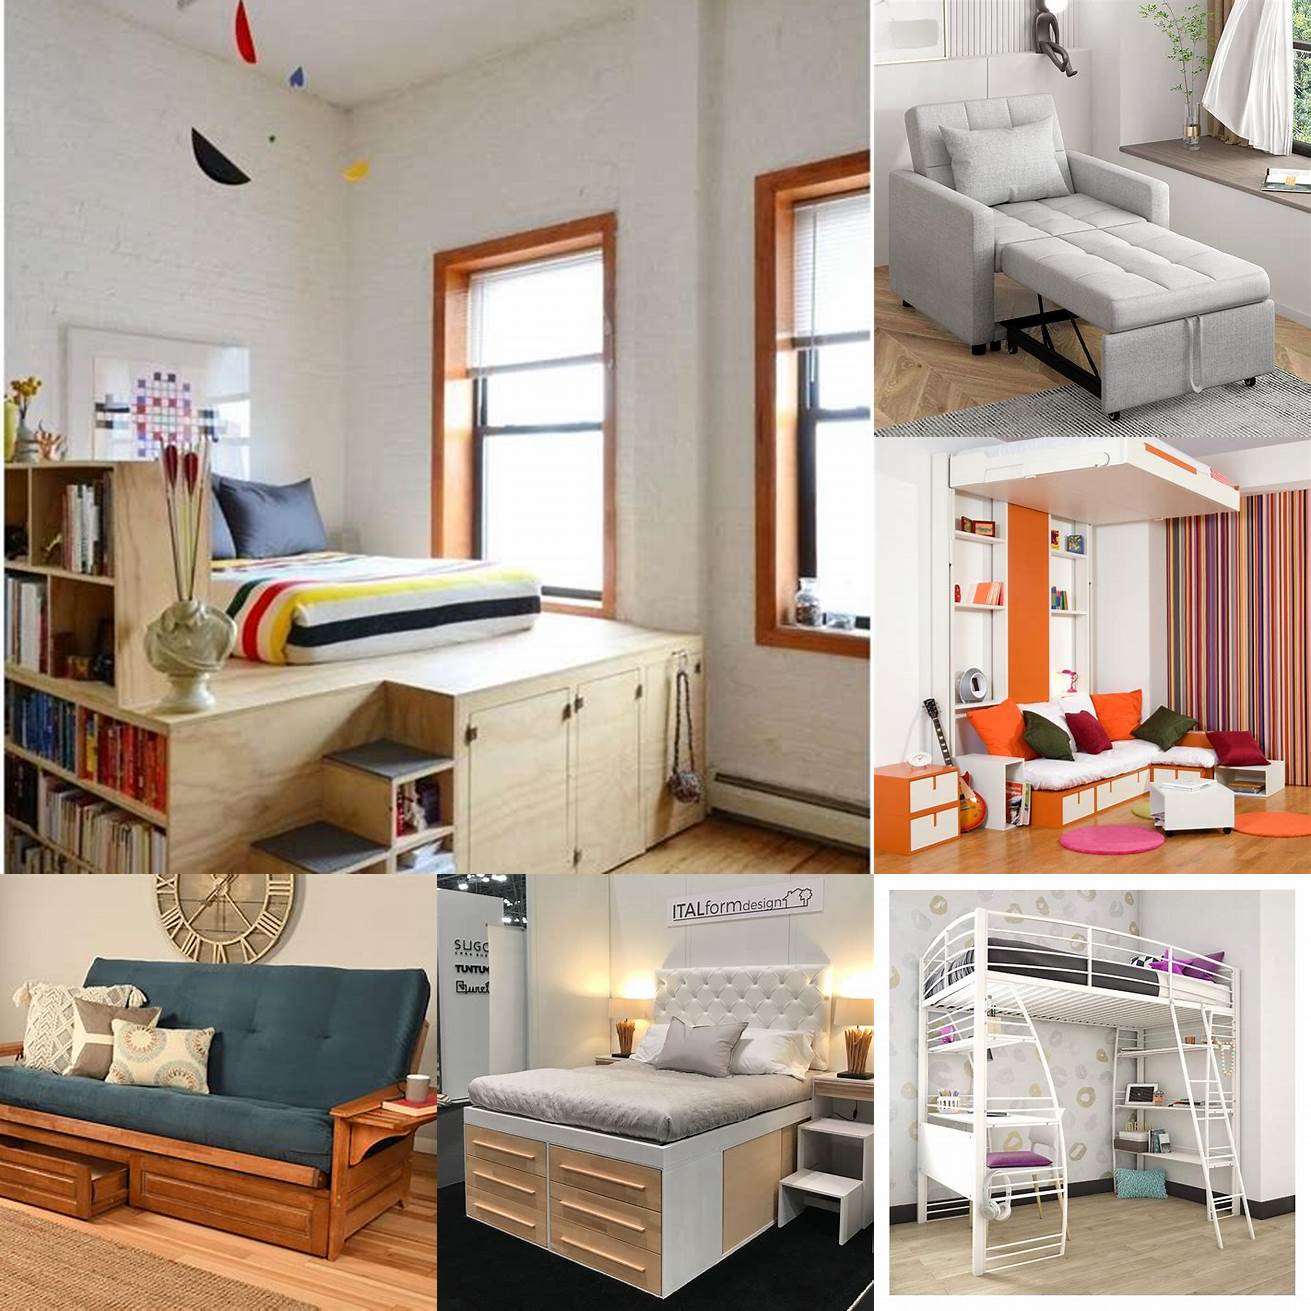 Space-saving Full day beds are great for small apartments or rooms where space is at a premium